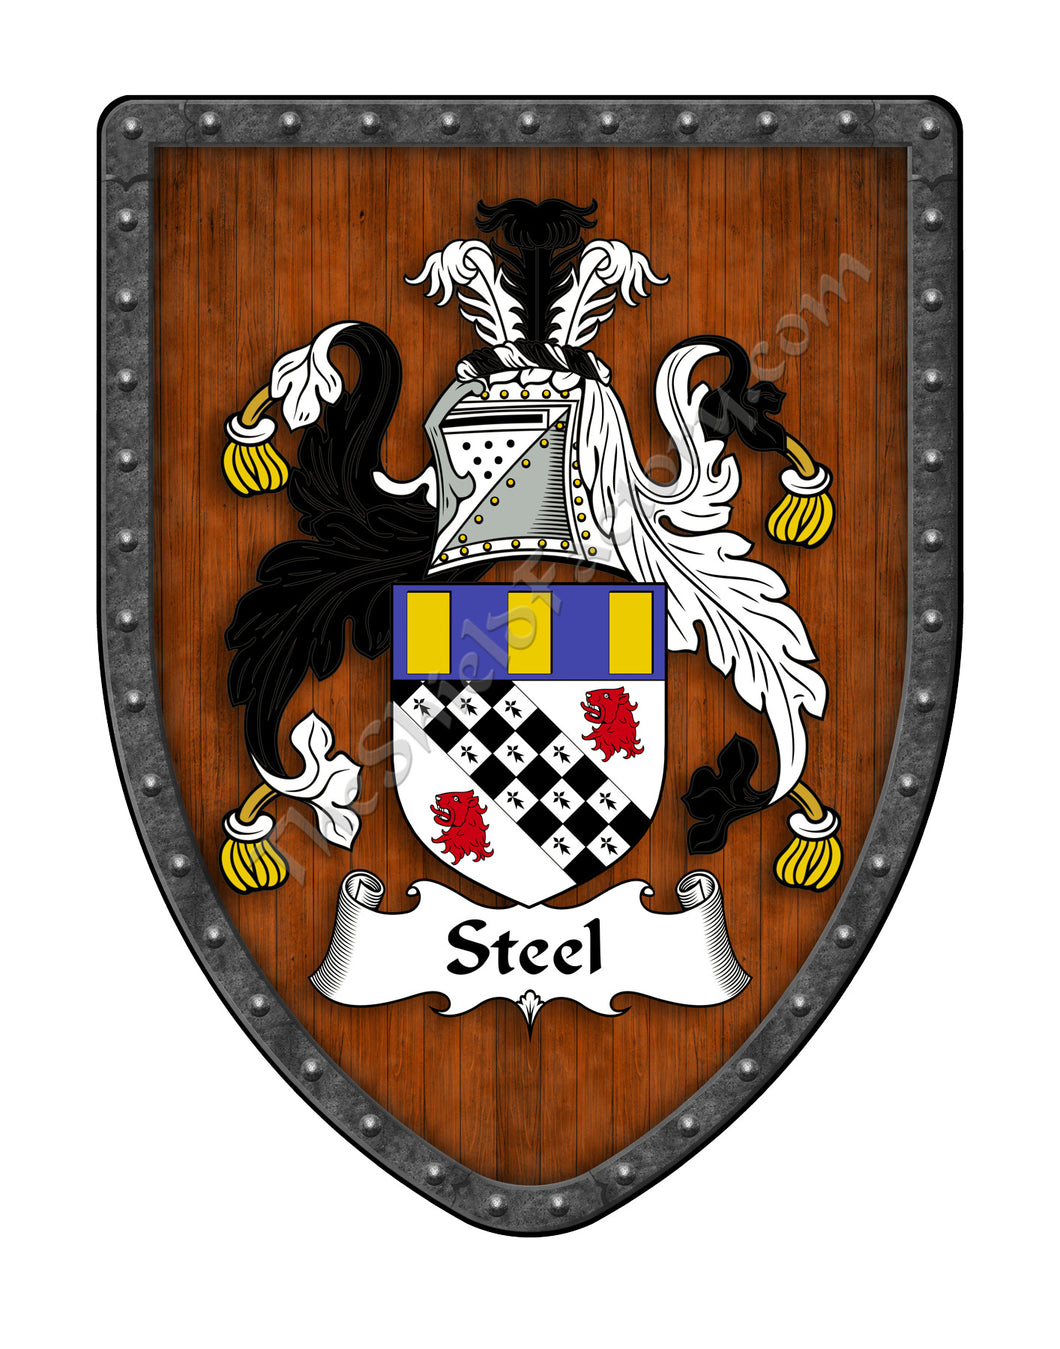 Steel Steele Coat of Arms Family Crest